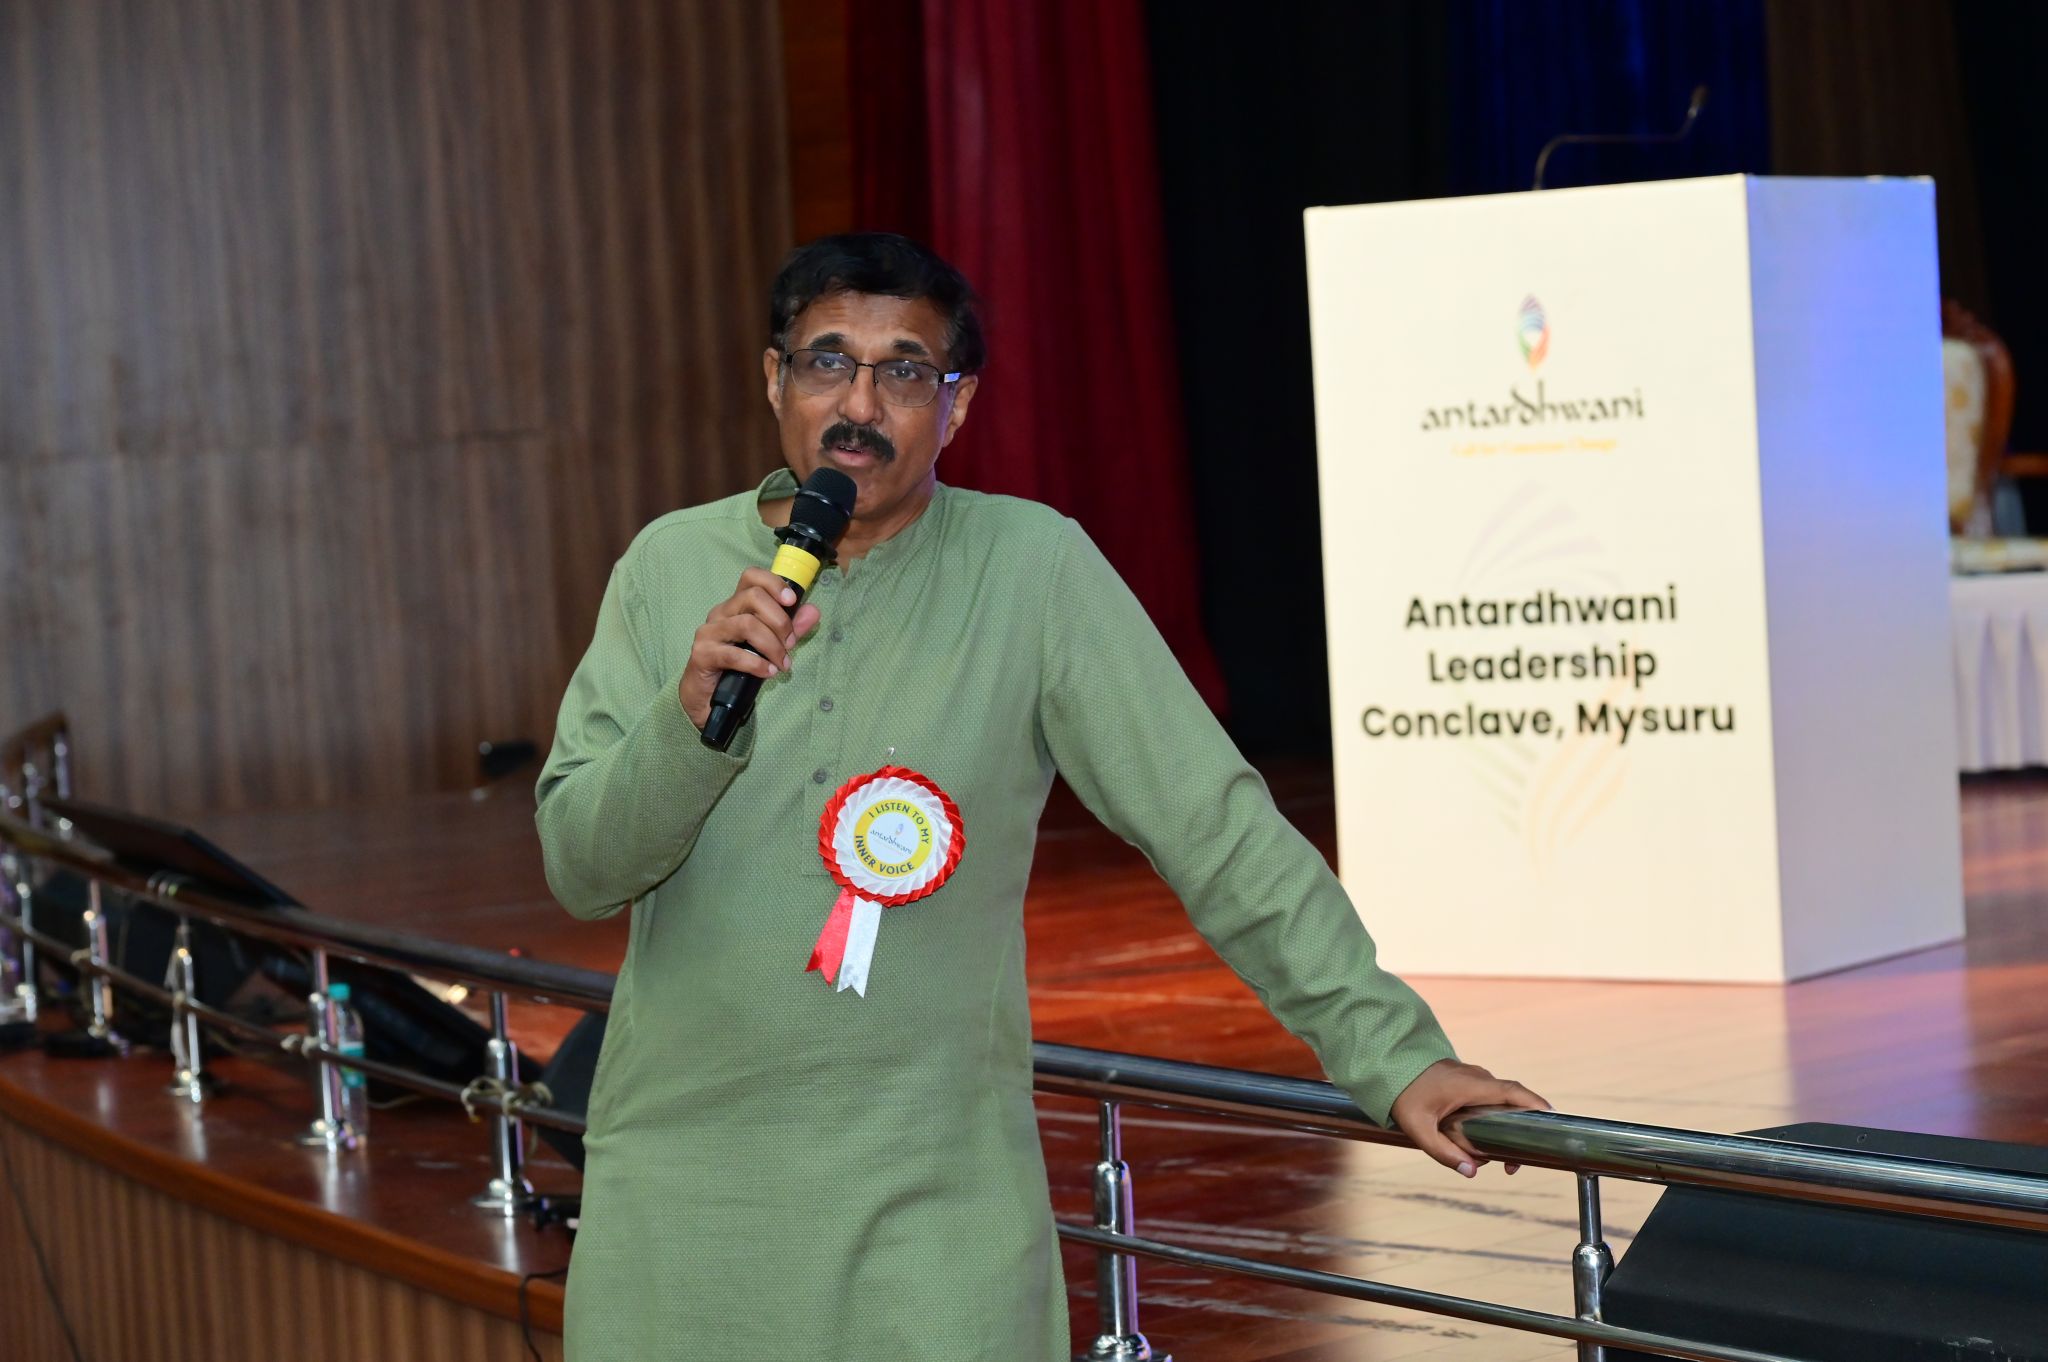 The Antardhwani Leadership Conclave in pictures